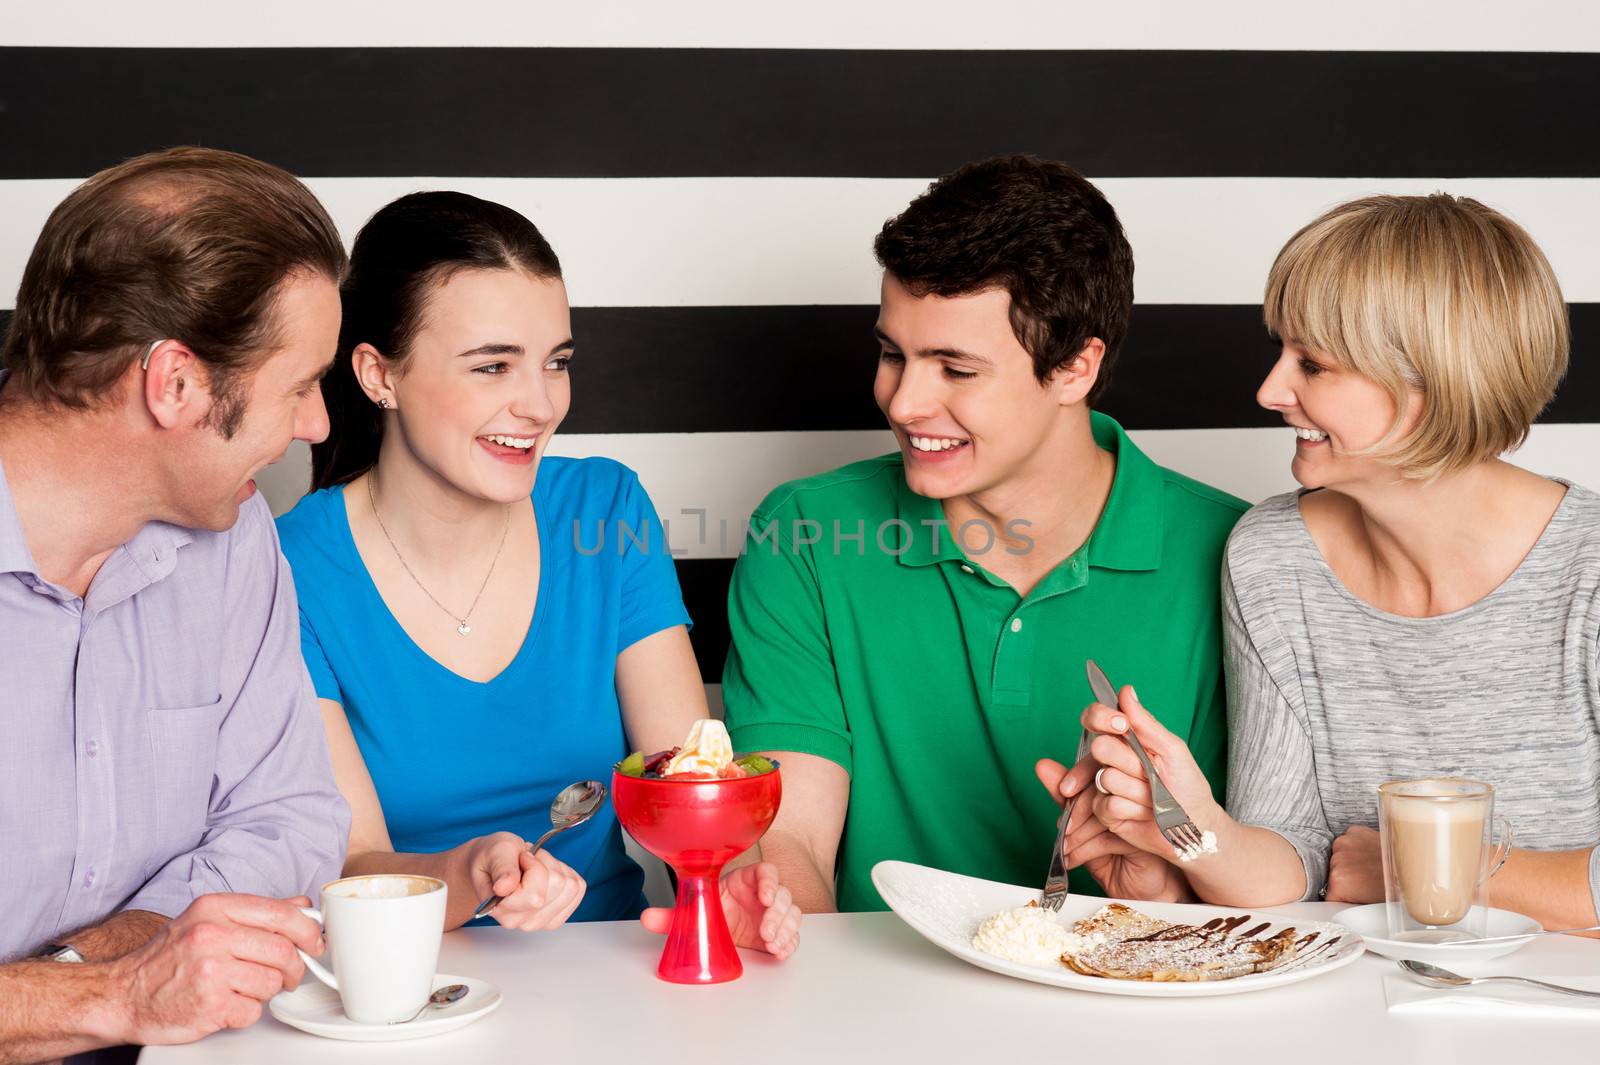 Cheerful family of four relishing delicious eatables and dessert.